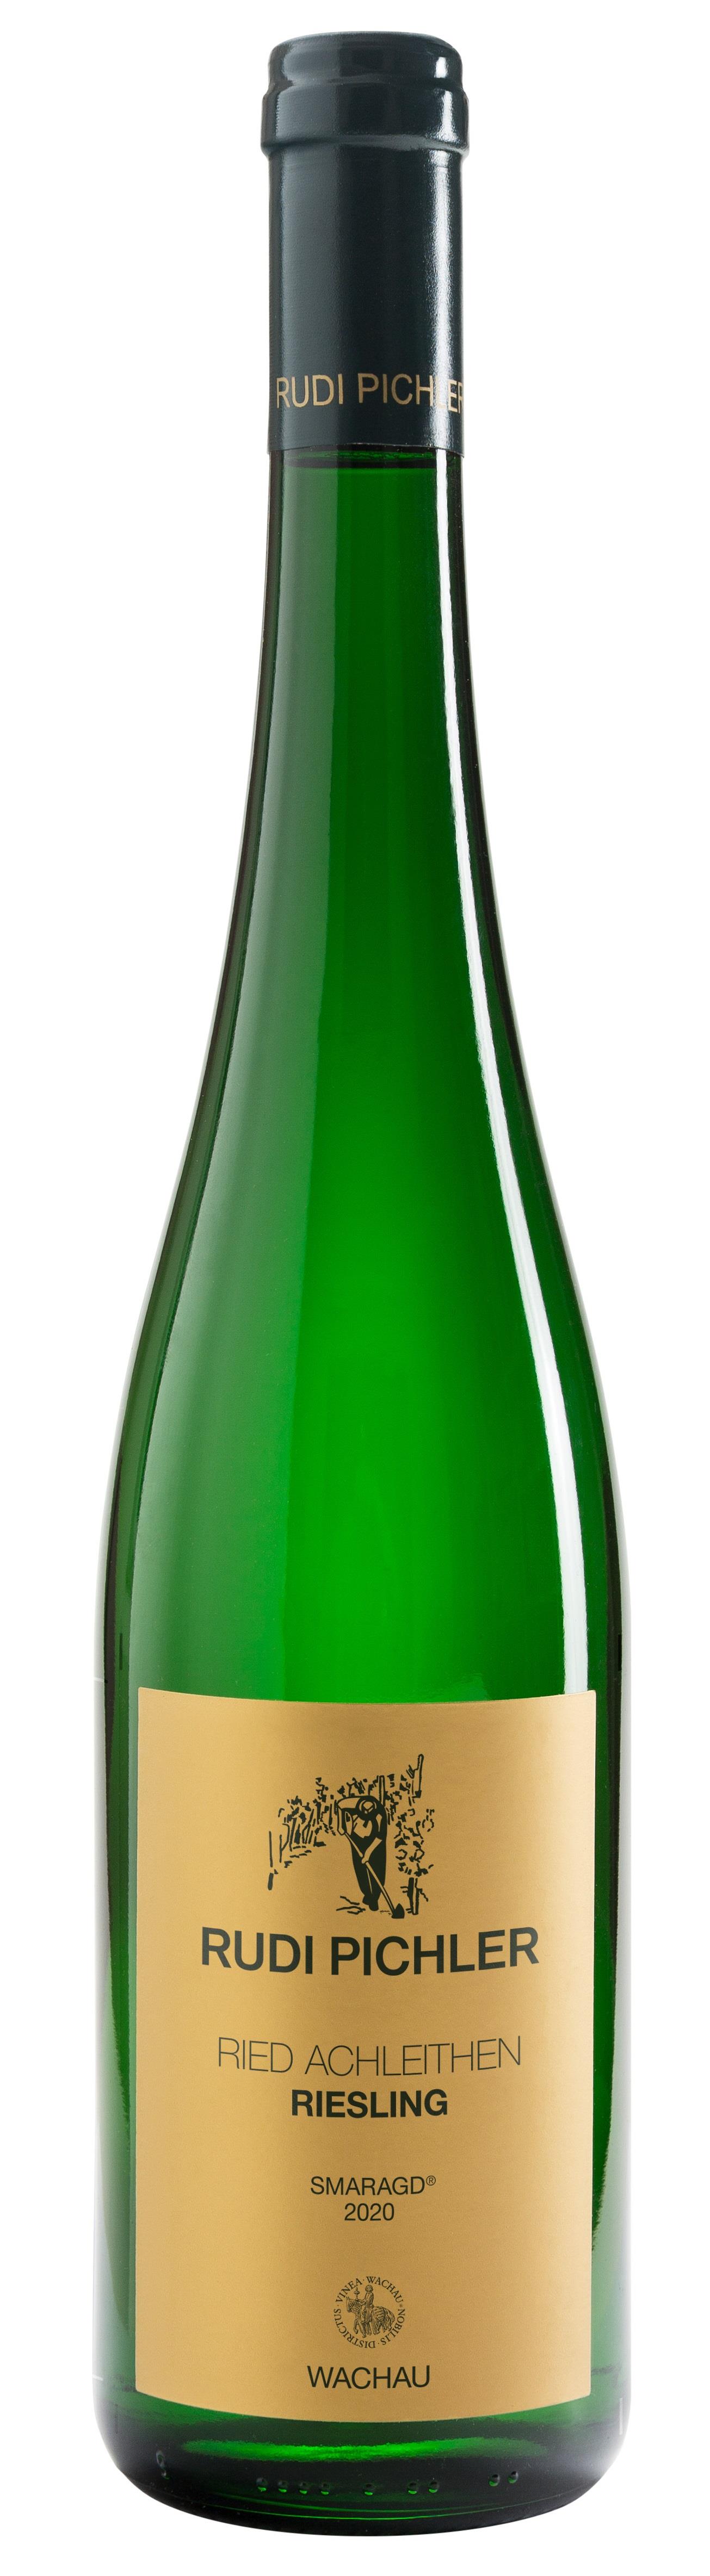 2020 Ried Achleithen Riesling Smaragd